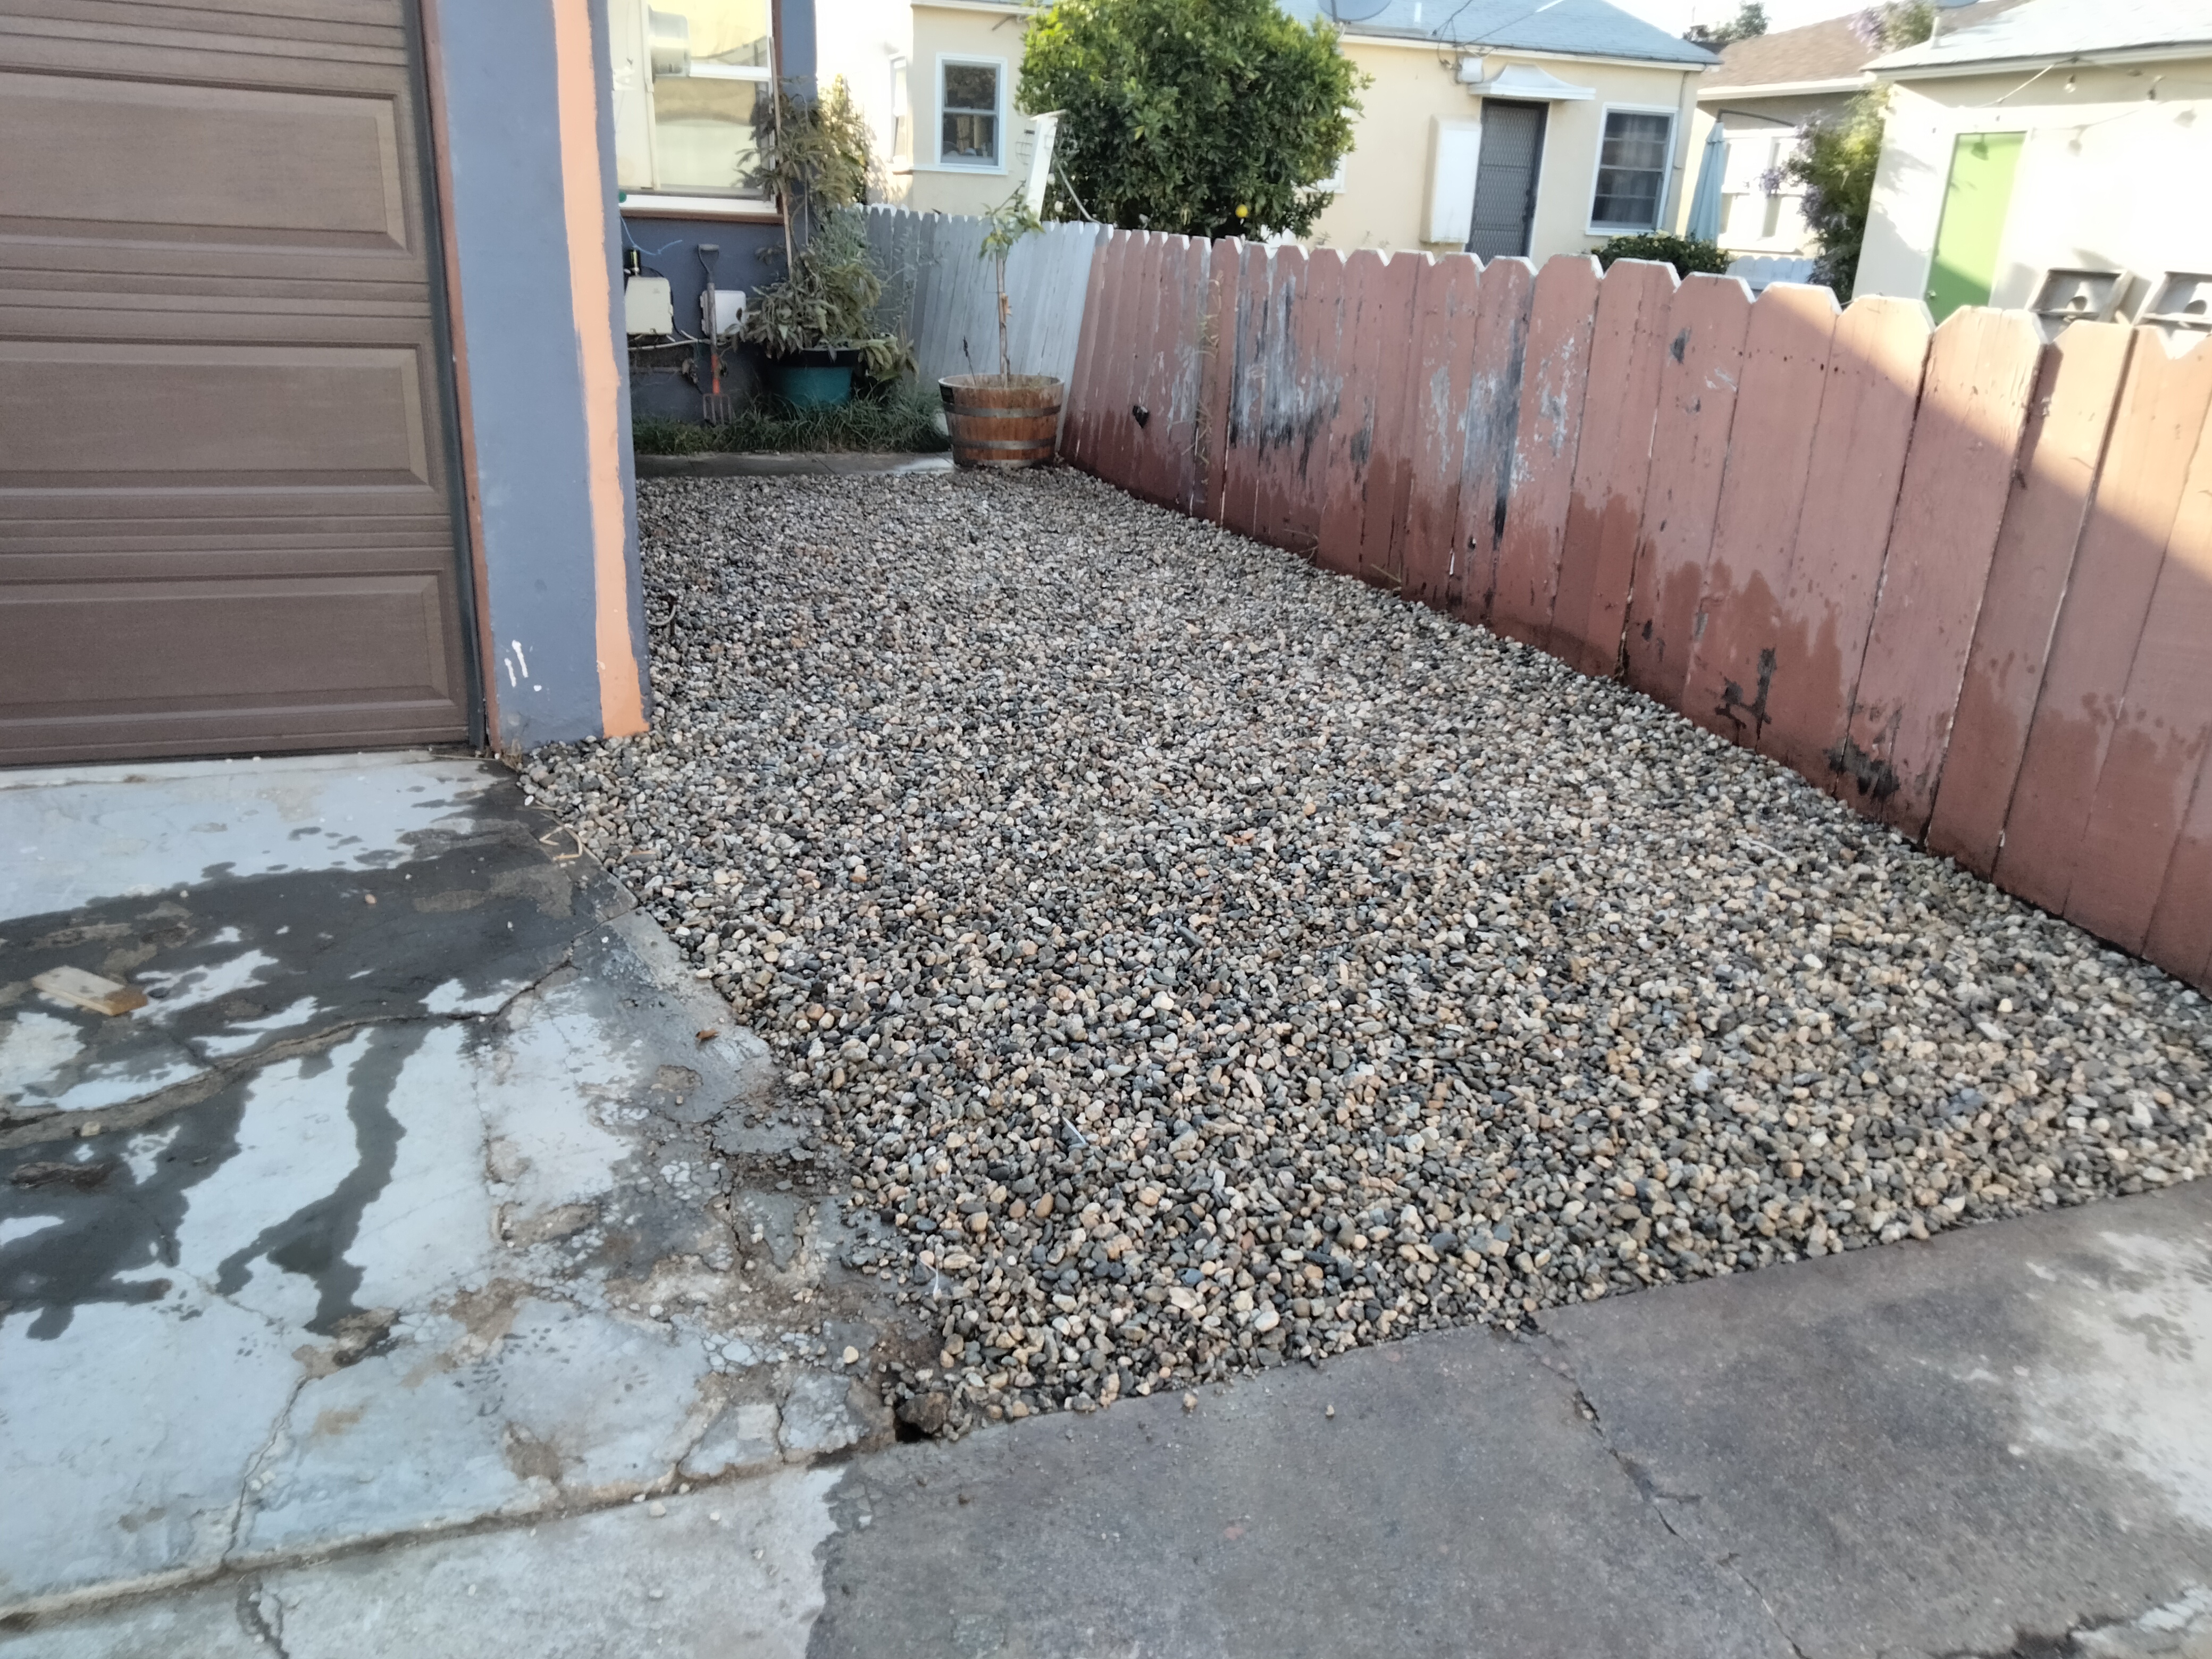 Driveway with grvel.